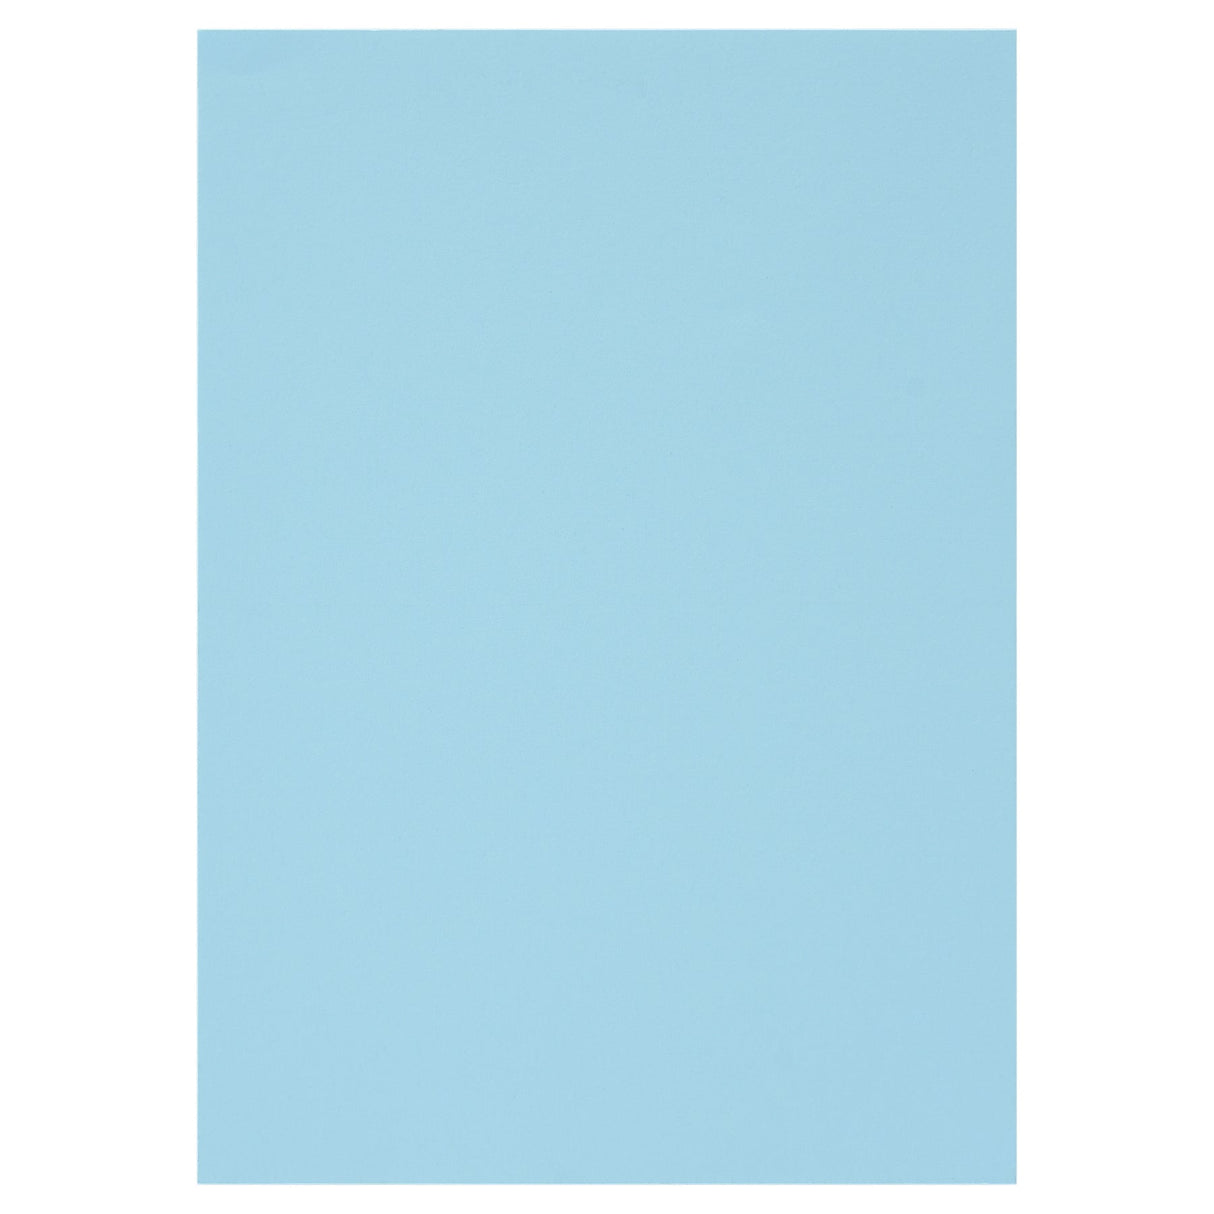 Premier Activity A4 Card - 160 gsm - Baby Blue - 50 Sheets-Craft Paper & Card-Premier | Buy Online at Stationery Shop